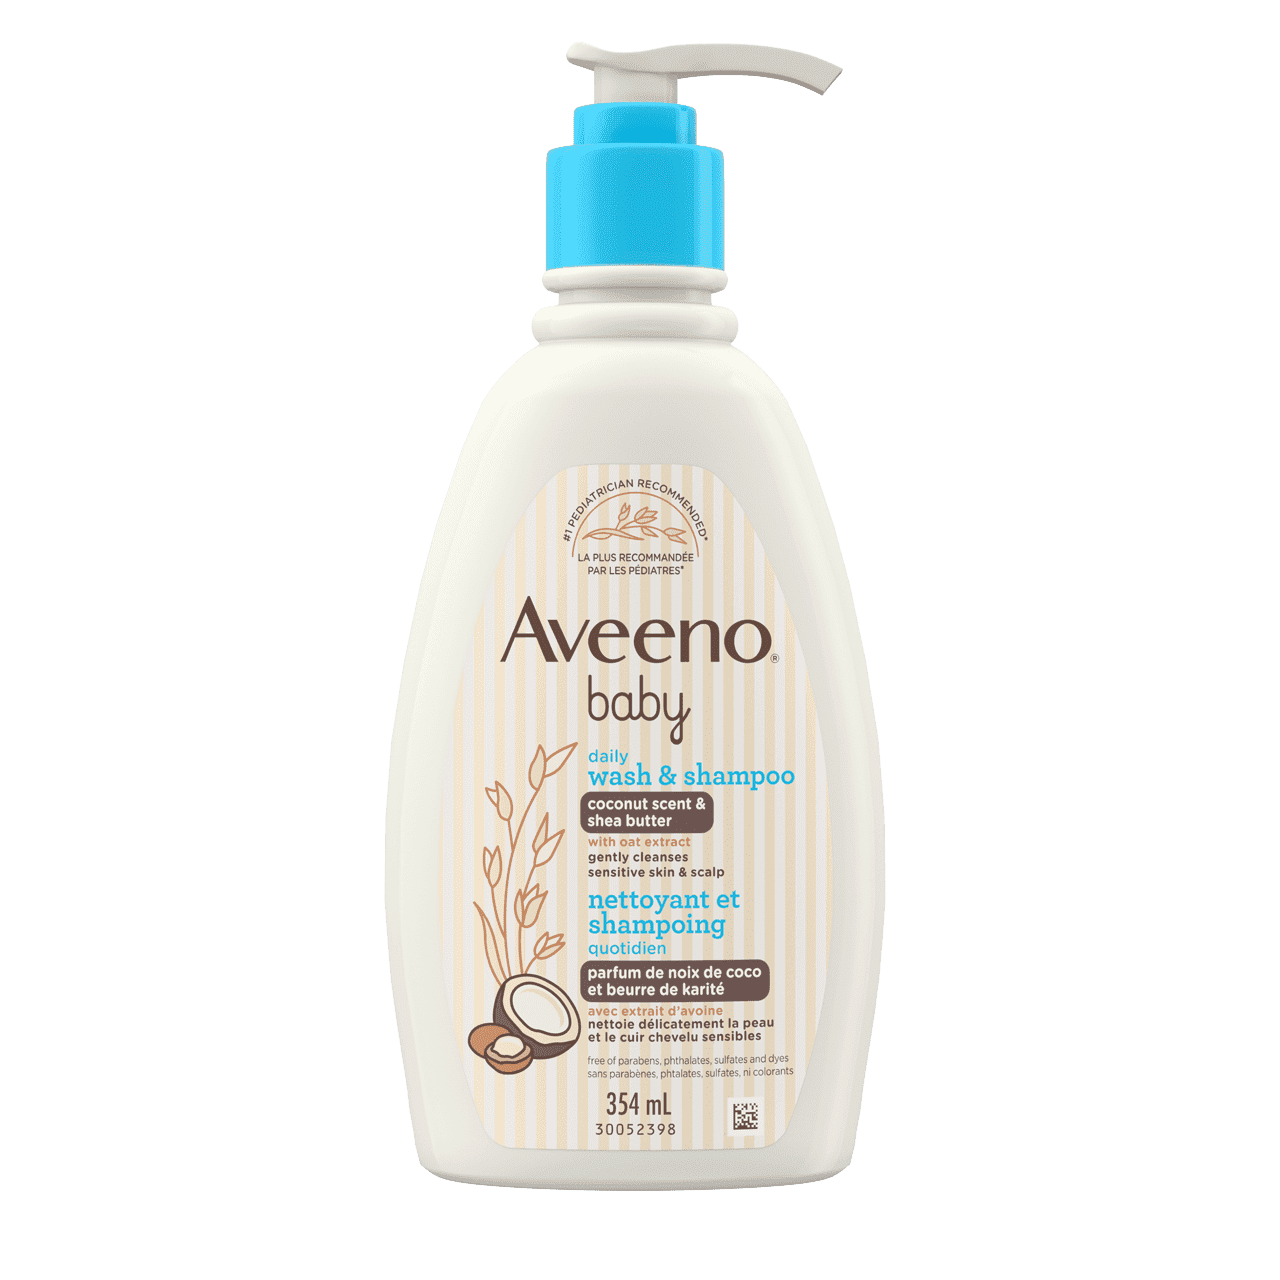 https://www.aveeno.ca/sites/aveeno_ca_2/files/product-images/ave_062600621962_ca_baby_daily_mstr_wash_shampoo_coconut_354ml_994495318_00000_0.png